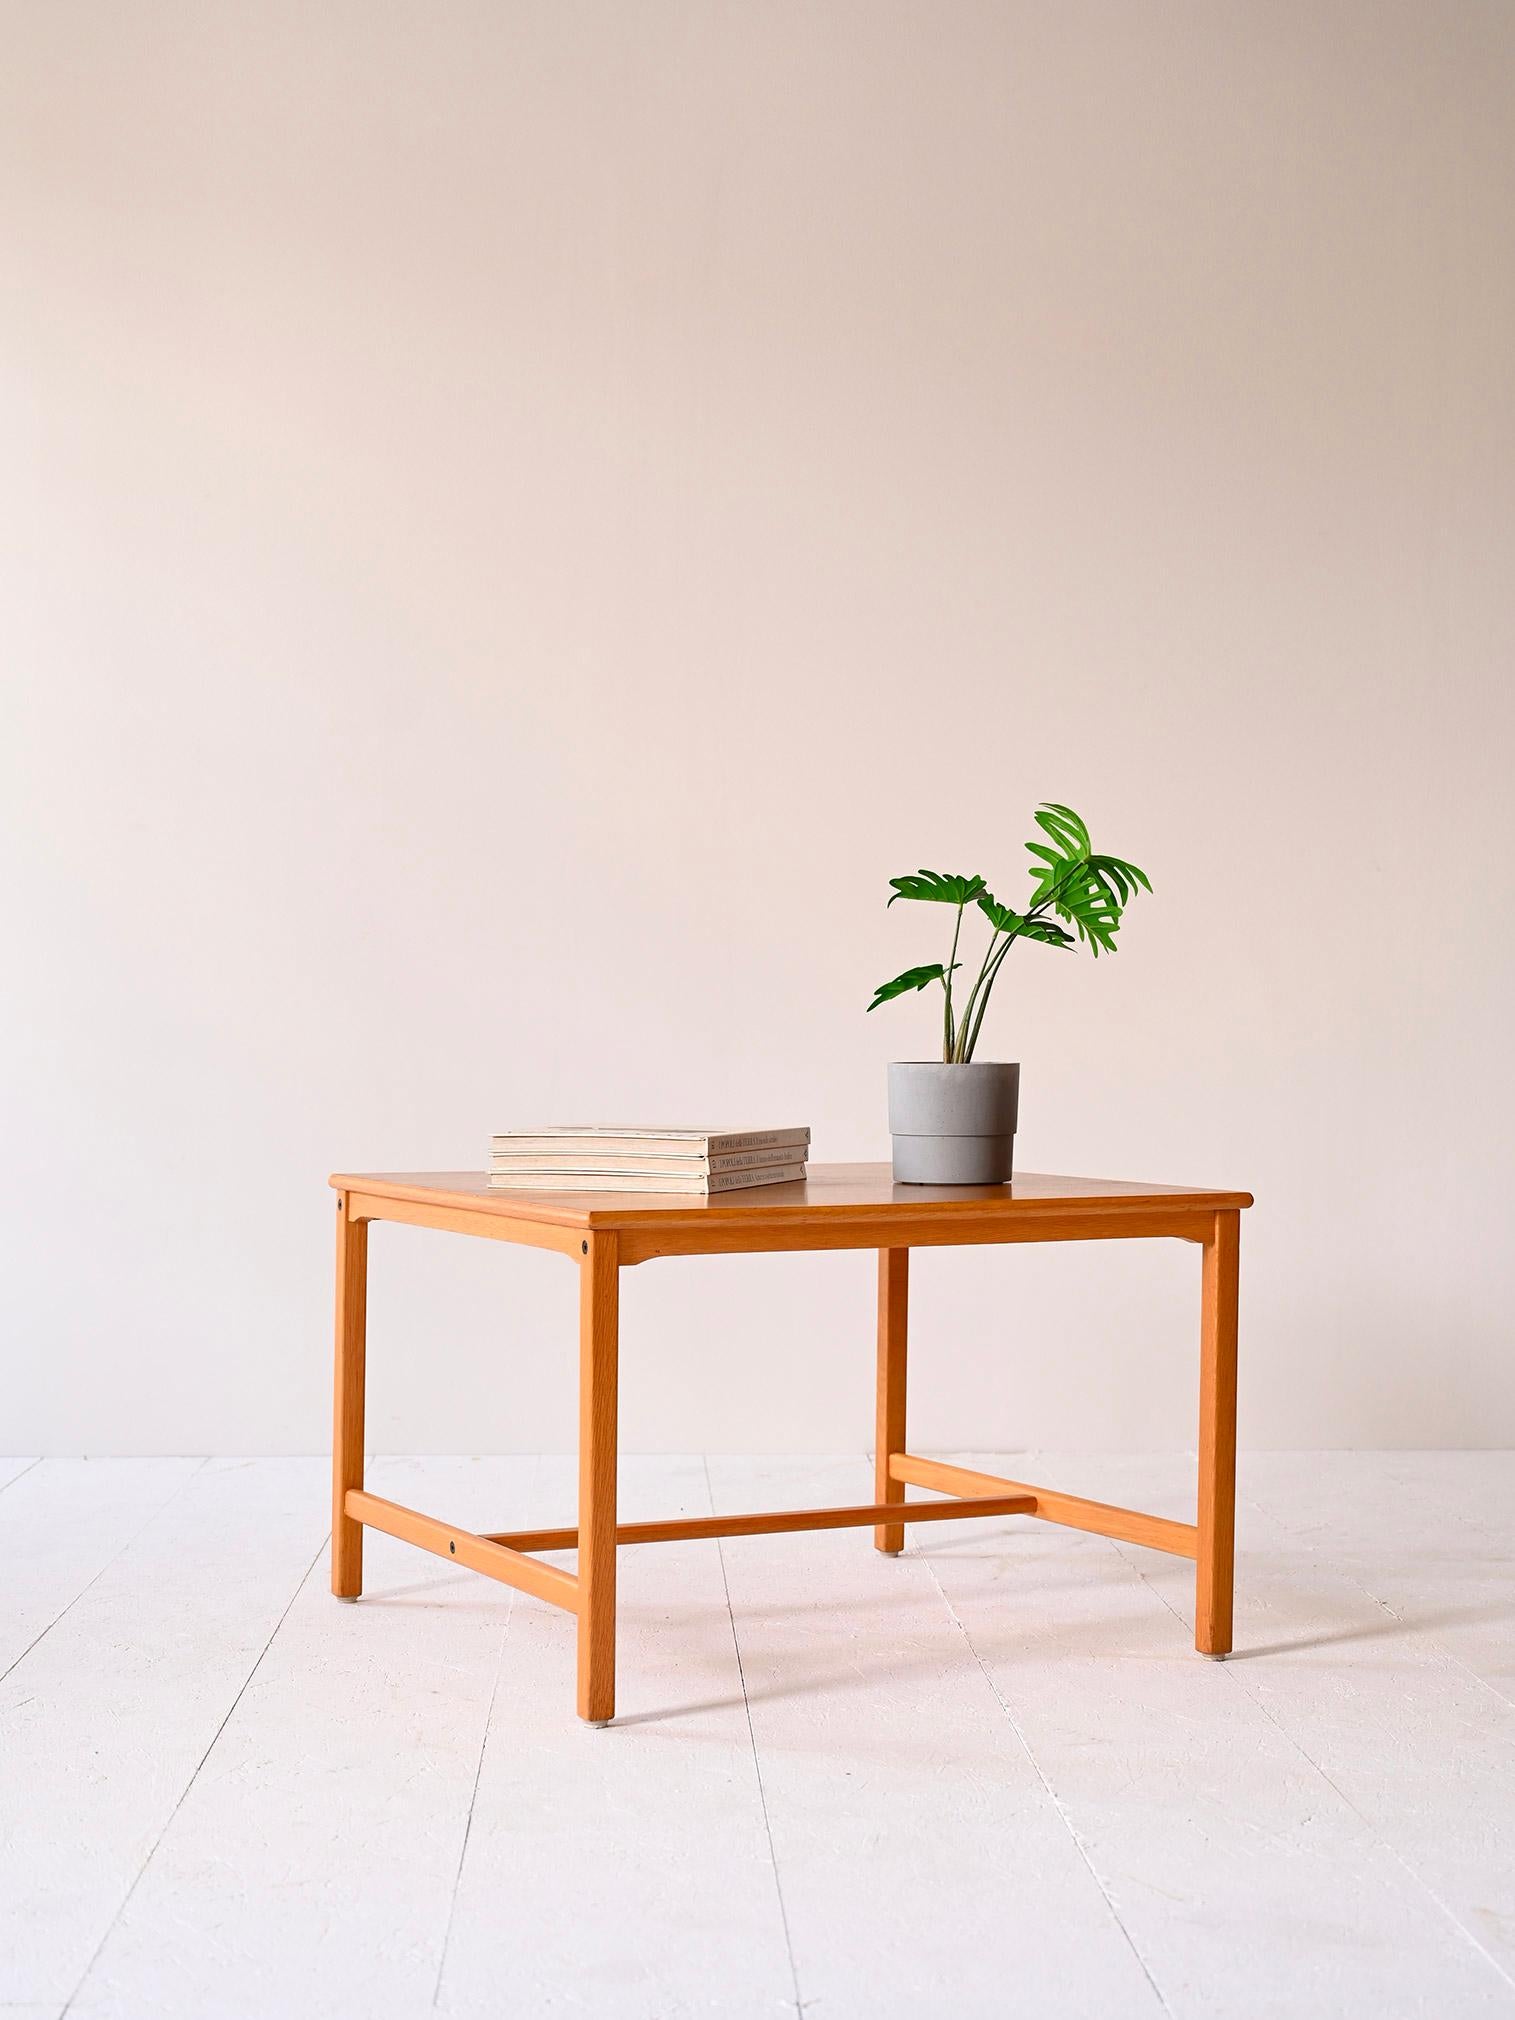 Coffee table of Scandinavian origin.

This coffee table is distinguished by its minimal and regular lines that make it a modern piece of furniture that can be easily inserted into already furnished rooms.
It consists of a rectangular top and long